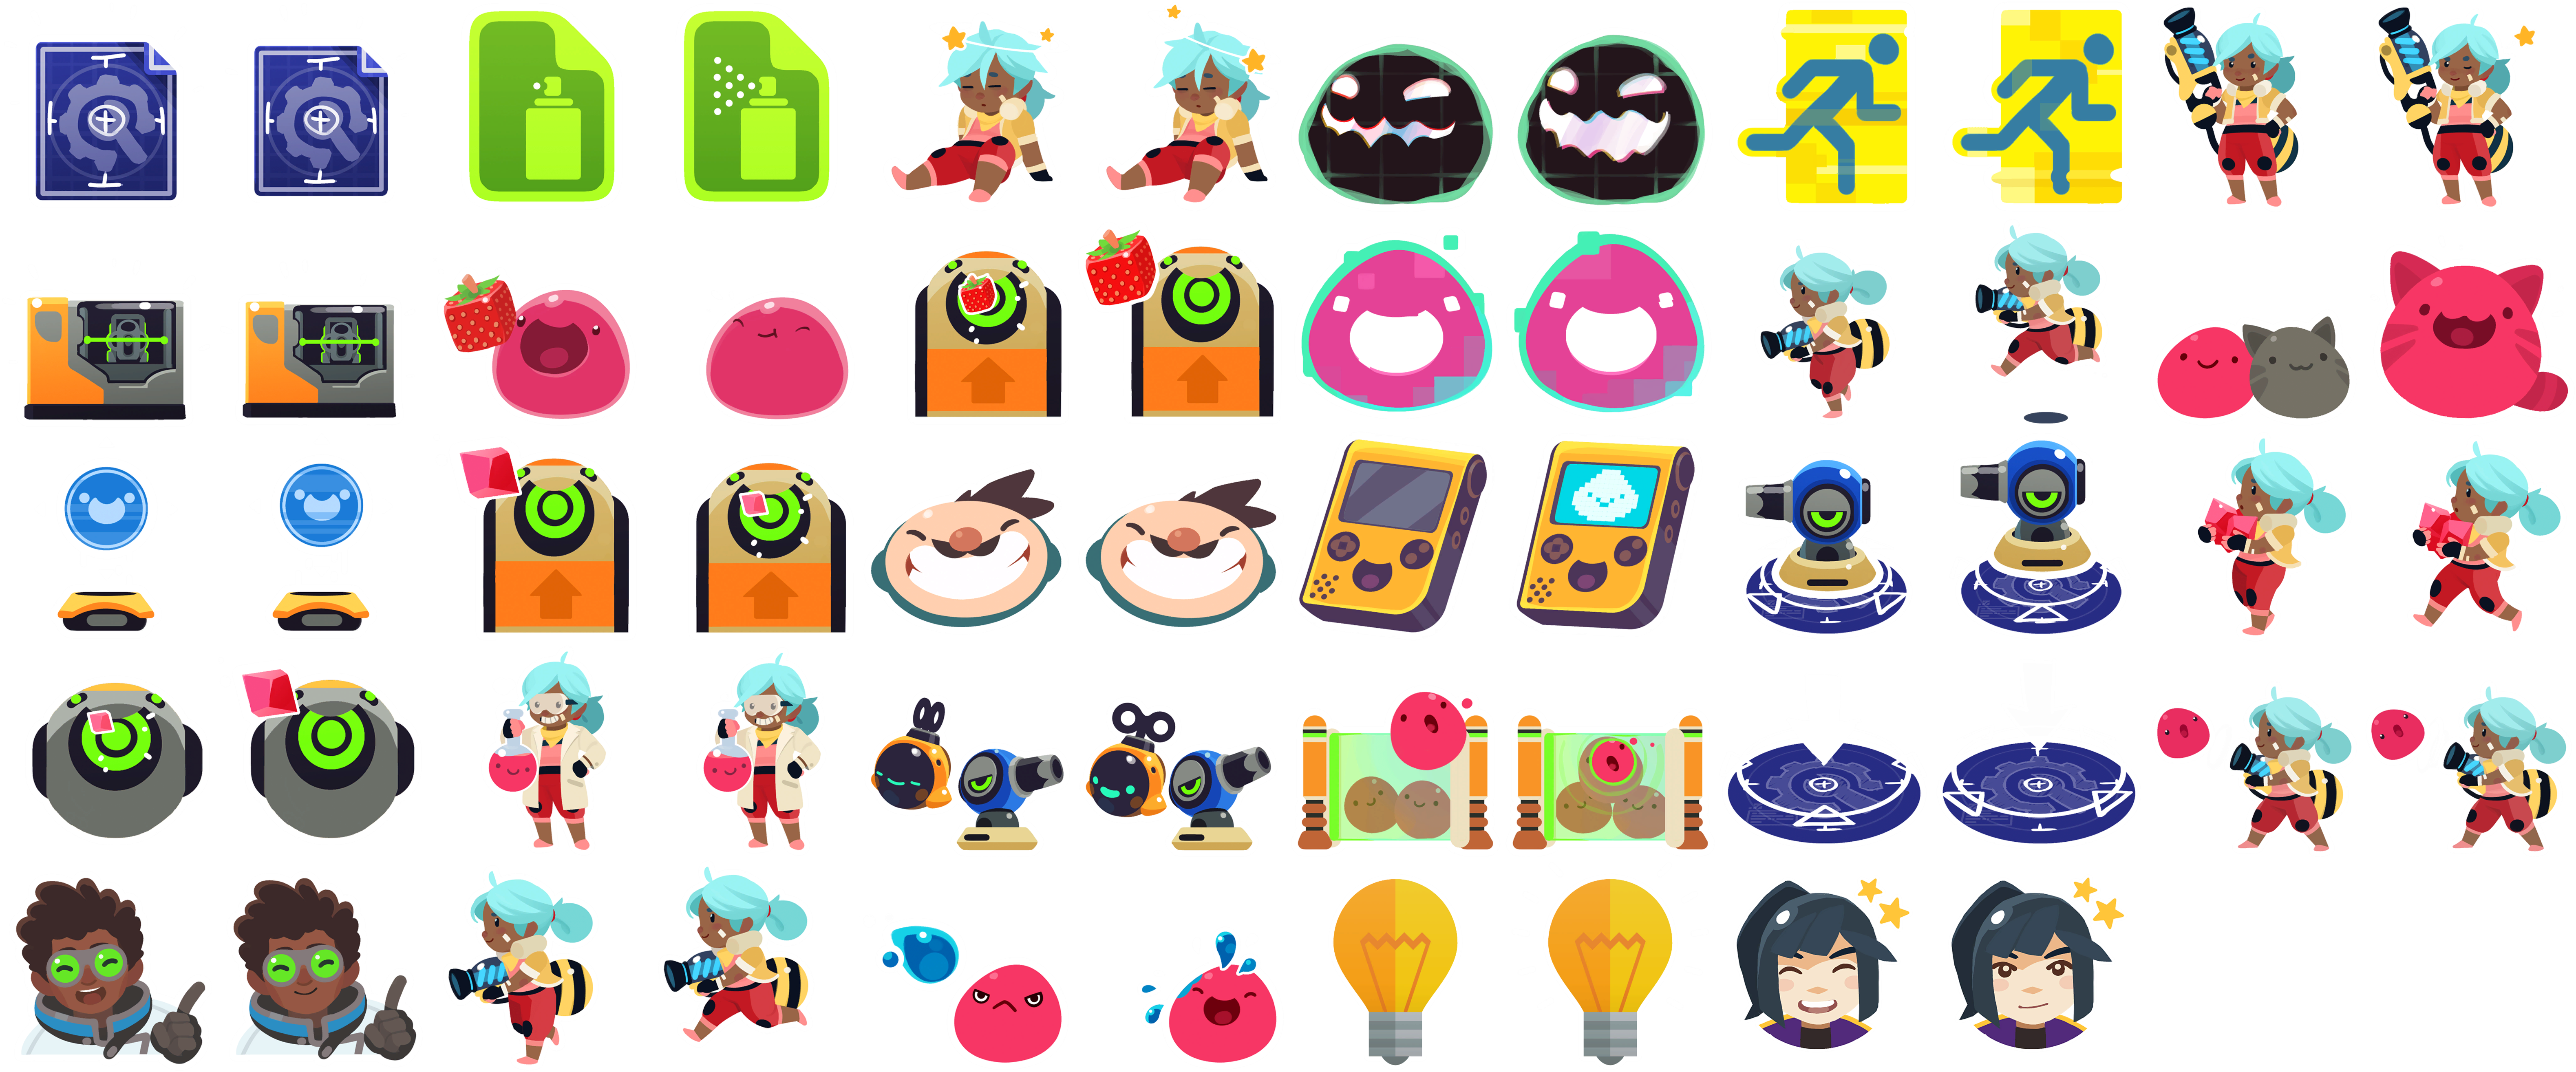 Slime Rancher - Tutorial Icons